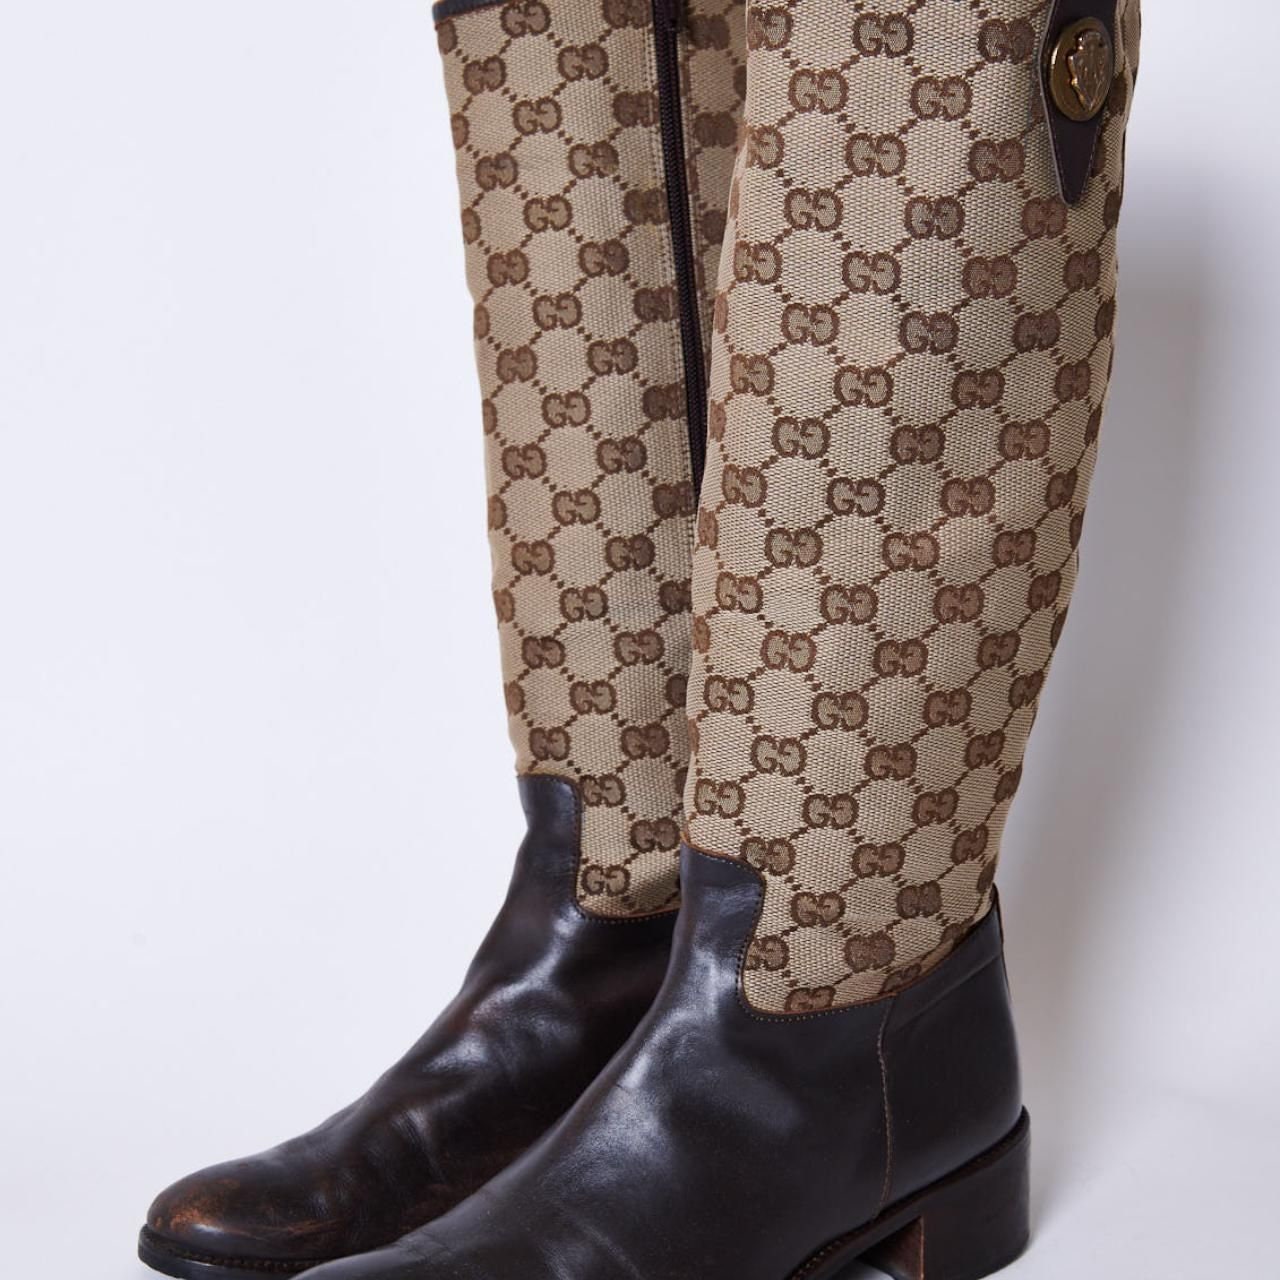 Vintage Women's Gucci Boots 5 Etsy